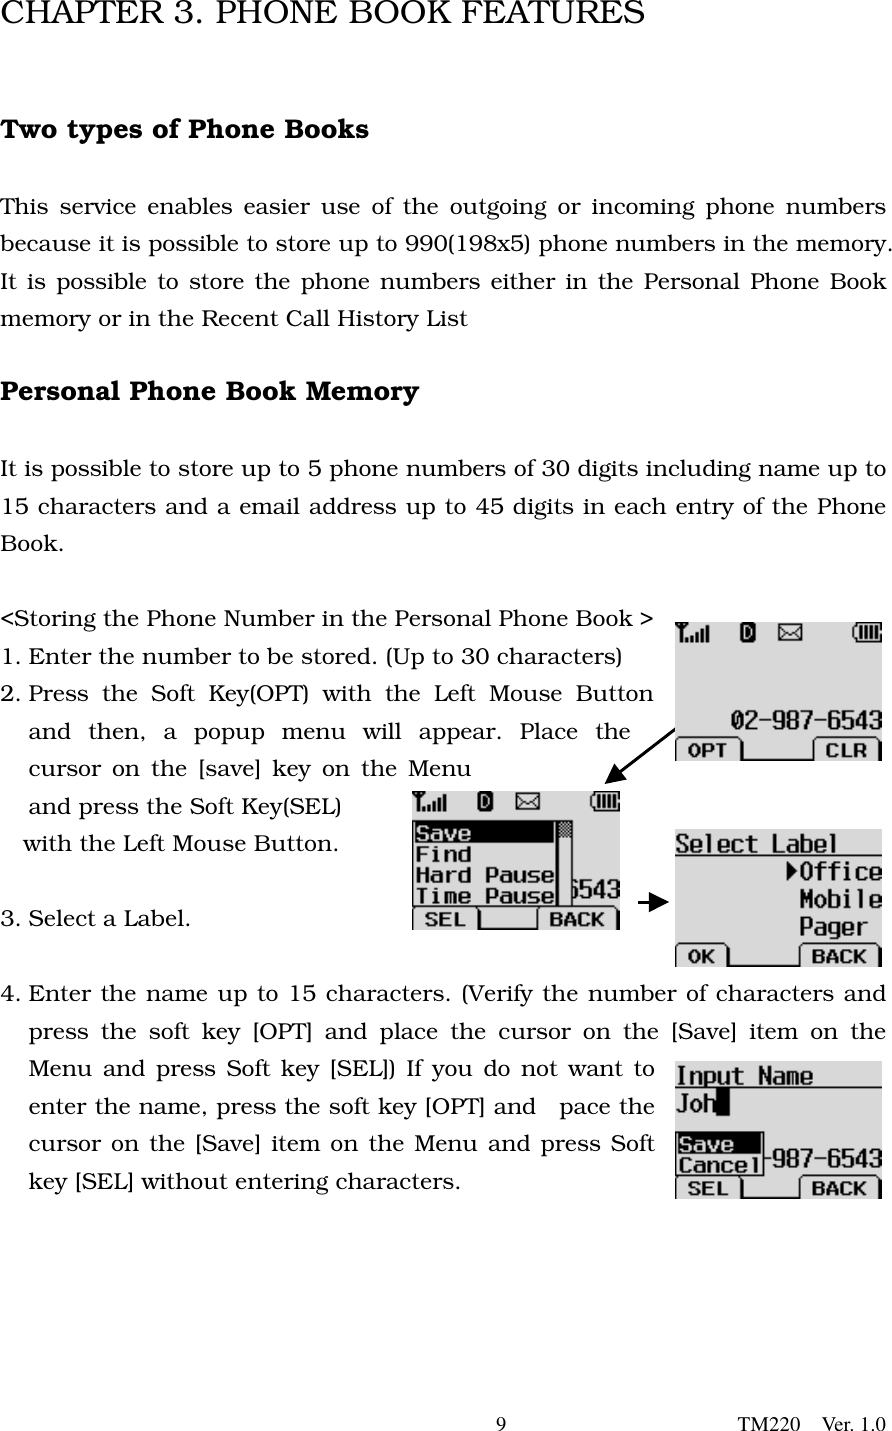        9                      TM220  Ver. 1.0 CHAPTER 3. PHONE BOOK FEATURES   Two types of Phone Books  This service enables easier use of the outgoing or incoming phone numbers because it is possible to store up to 990(198x5) phone numbers in the memory. It is possible to store the phone numbers either in the Personal Phone Book memory or in the Recent Call History List    Personal Phone Book Memory  It is possible to store up to 5 phone numbers of 30 digits including name up to 15 characters and a email address up to 45 digits in each entry of the Phone Book.   &lt;Storing the Phone Number in the Personal Phone Book &gt; 1. Enter the number to be stored. (Up to 30 characters) 2. Press the Soft Key(OPT) with the Left Mouse Button and then, a popup menu will appear. Place the cursor on the [save] key on the Menu and press the Soft Key(SEL)   with the Left Mouse Button.    3. Select a Label.    4. Enter the name up to 15 characters. (Verify the number of characters and press the soft key [OPT] and place the cursor on the [Save] item on the Menu and press Soft key [SEL]) If you do not want to enter the name, press the soft key [OPT] and  pace the cursor on the [Save] item on the Menu and press Soft key [SEL] without entering characters.       